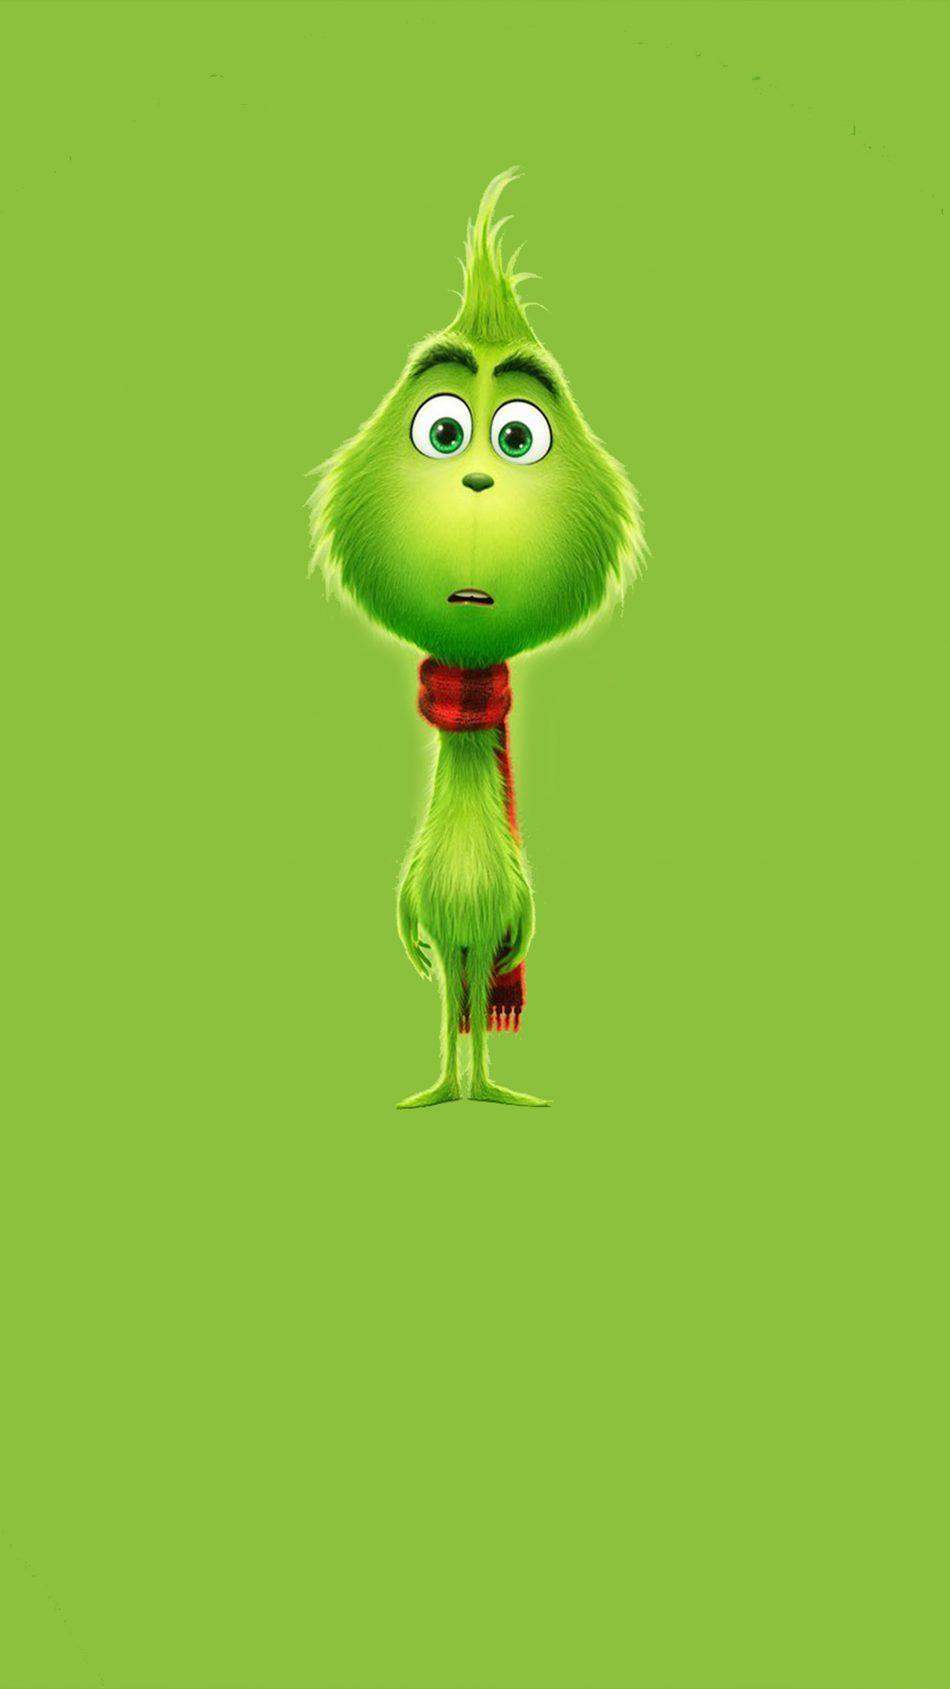 The Grinch Movie 2018. The grinch movie, Funny christmas